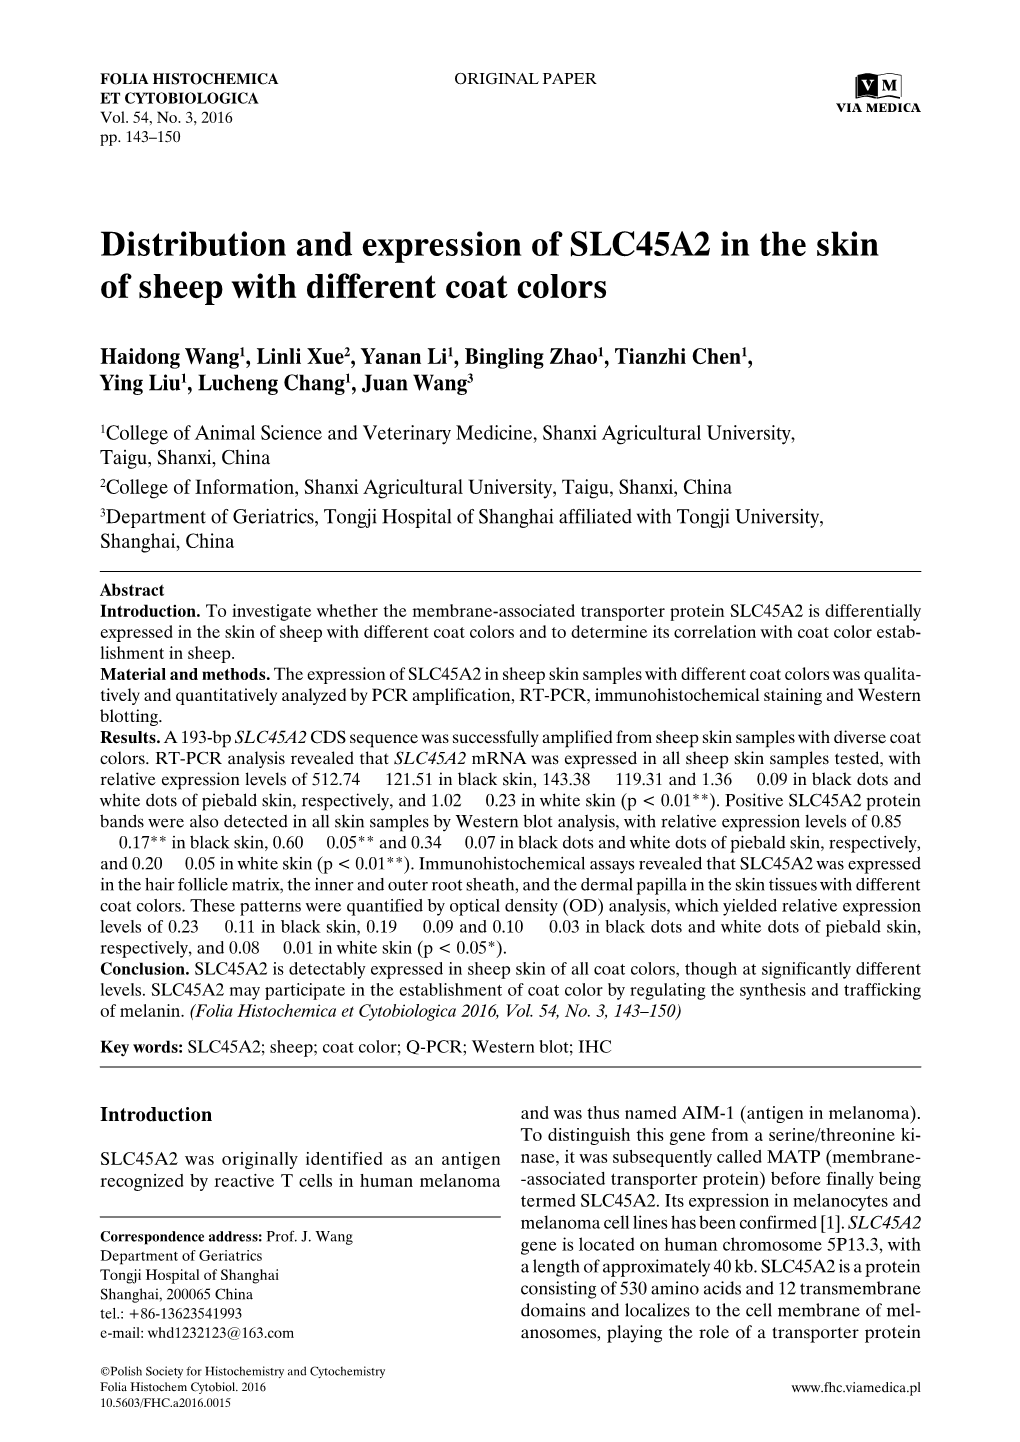 Distribution and Expression of SLC45A2 in the Skin of Sheep with Different Coat Colors